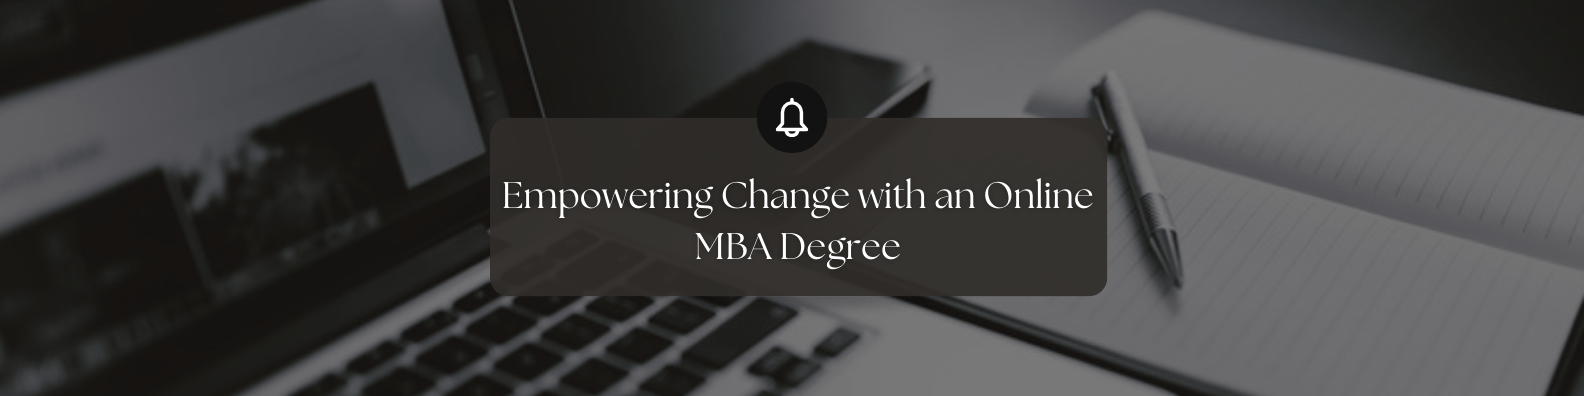 Empowering Change with an Online MBA Degree